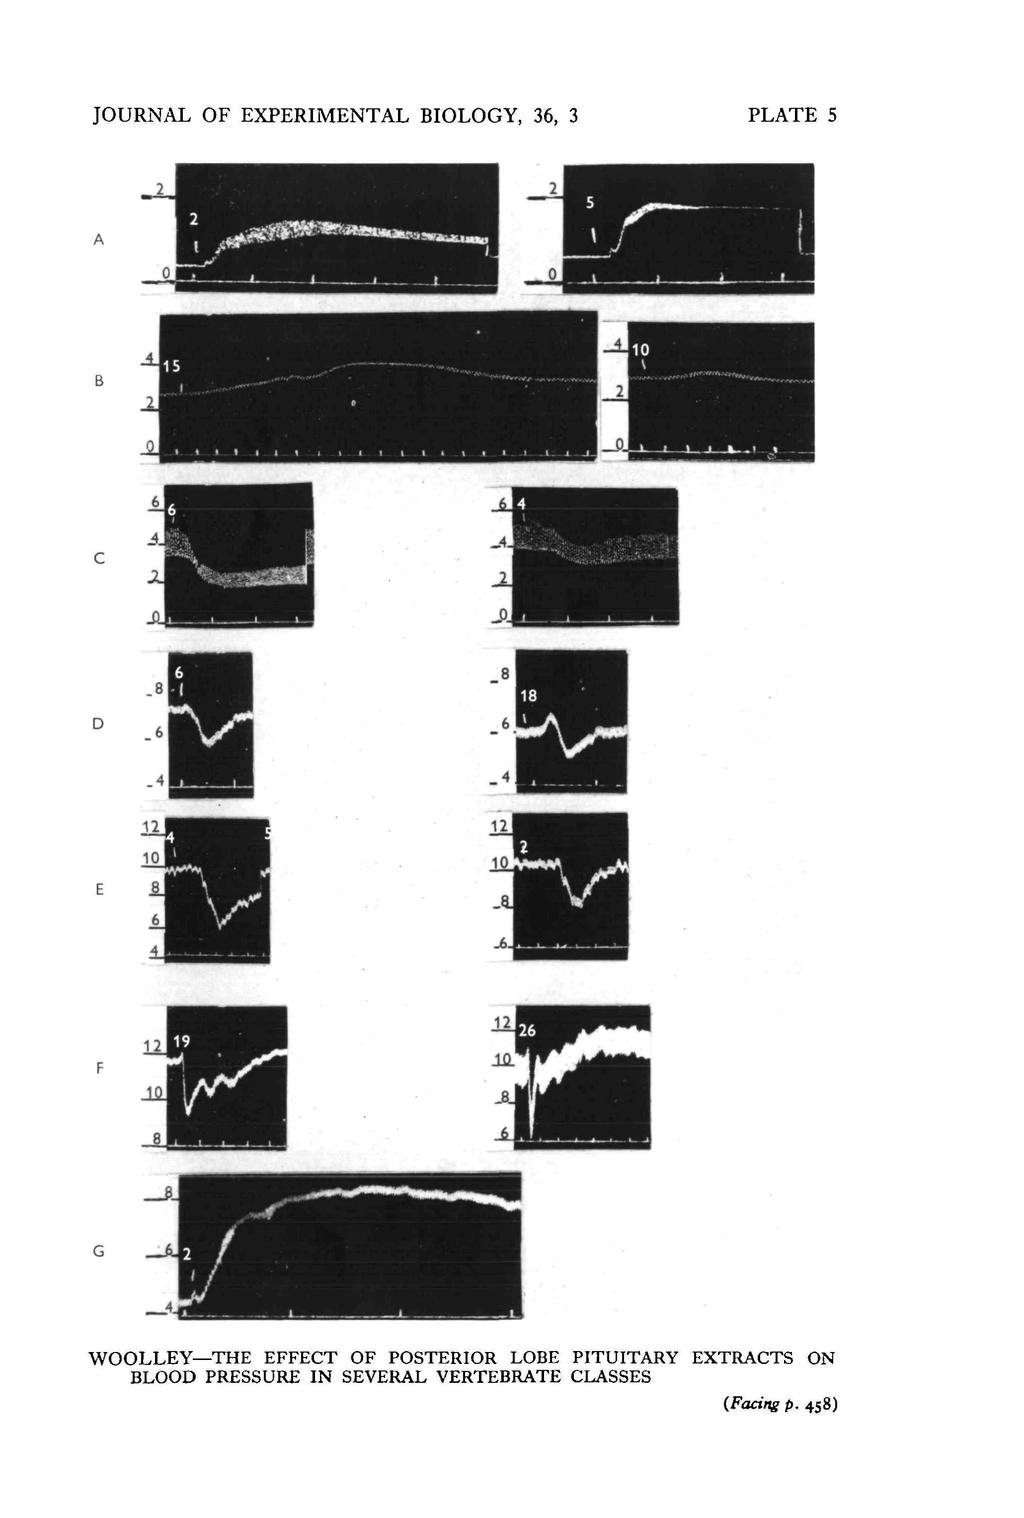 JOURNAL OF EXPERIMENTAL BIOLOGY, 36, 3 PLATE 5 WOOLLEY THE EFFECT OF POSTERIOR